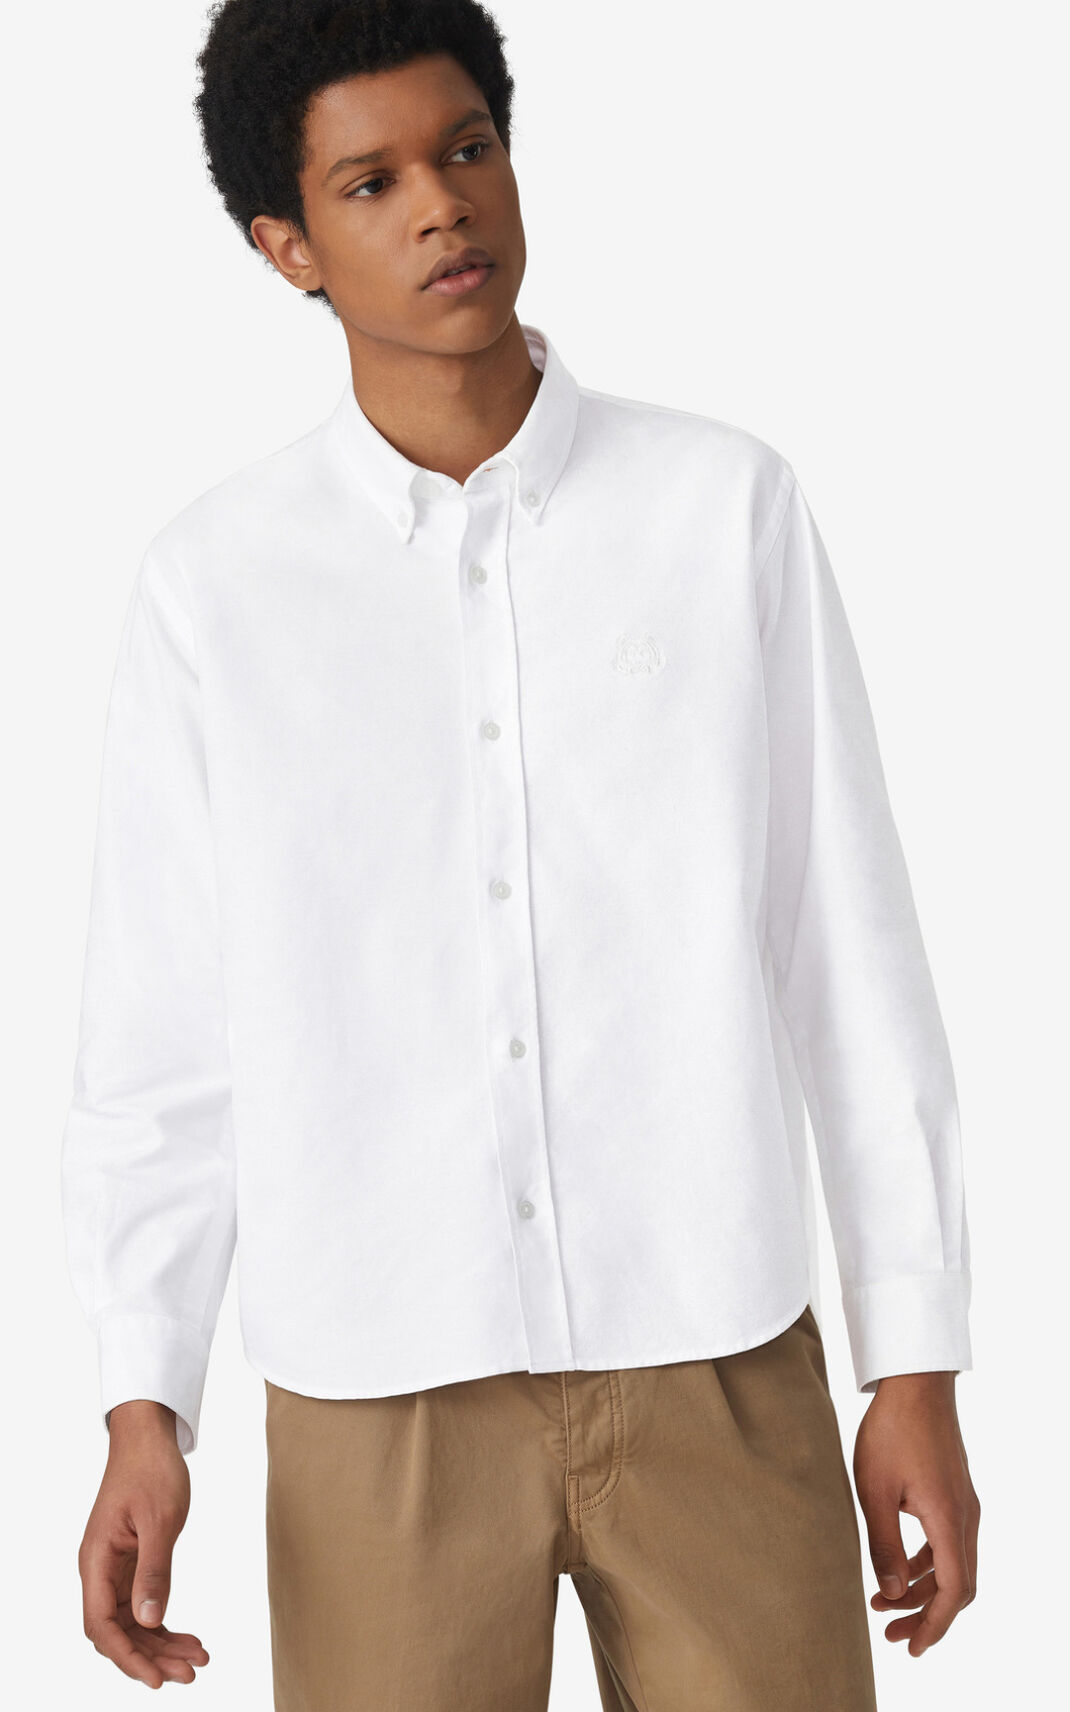 Kenzo Tiger Crest casual Shirt White For Mens 7483SURYP